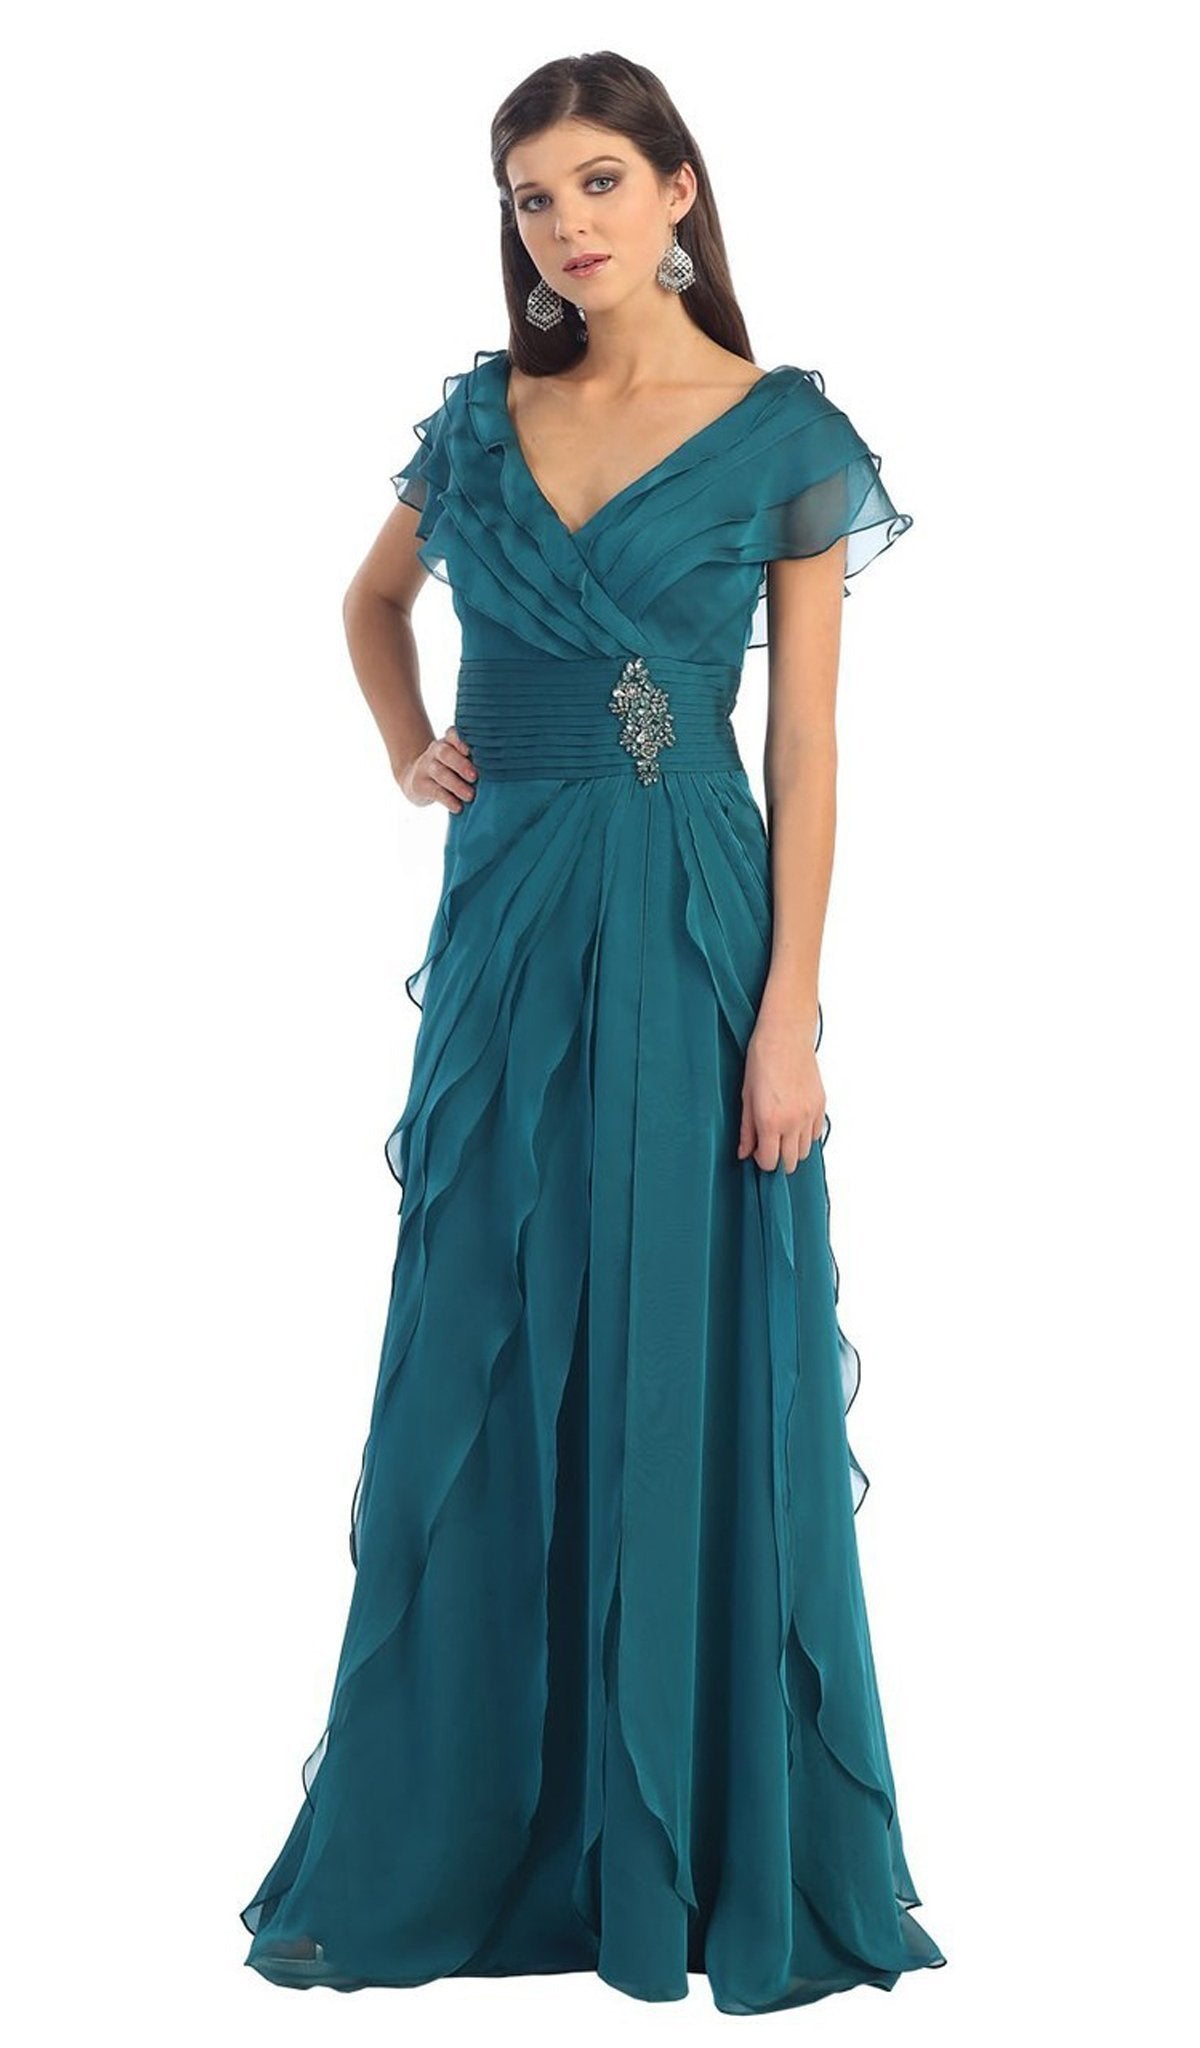 May Queen - MQ831 Tiered Chiffon Surplice V-Neck Formal Dress In Green